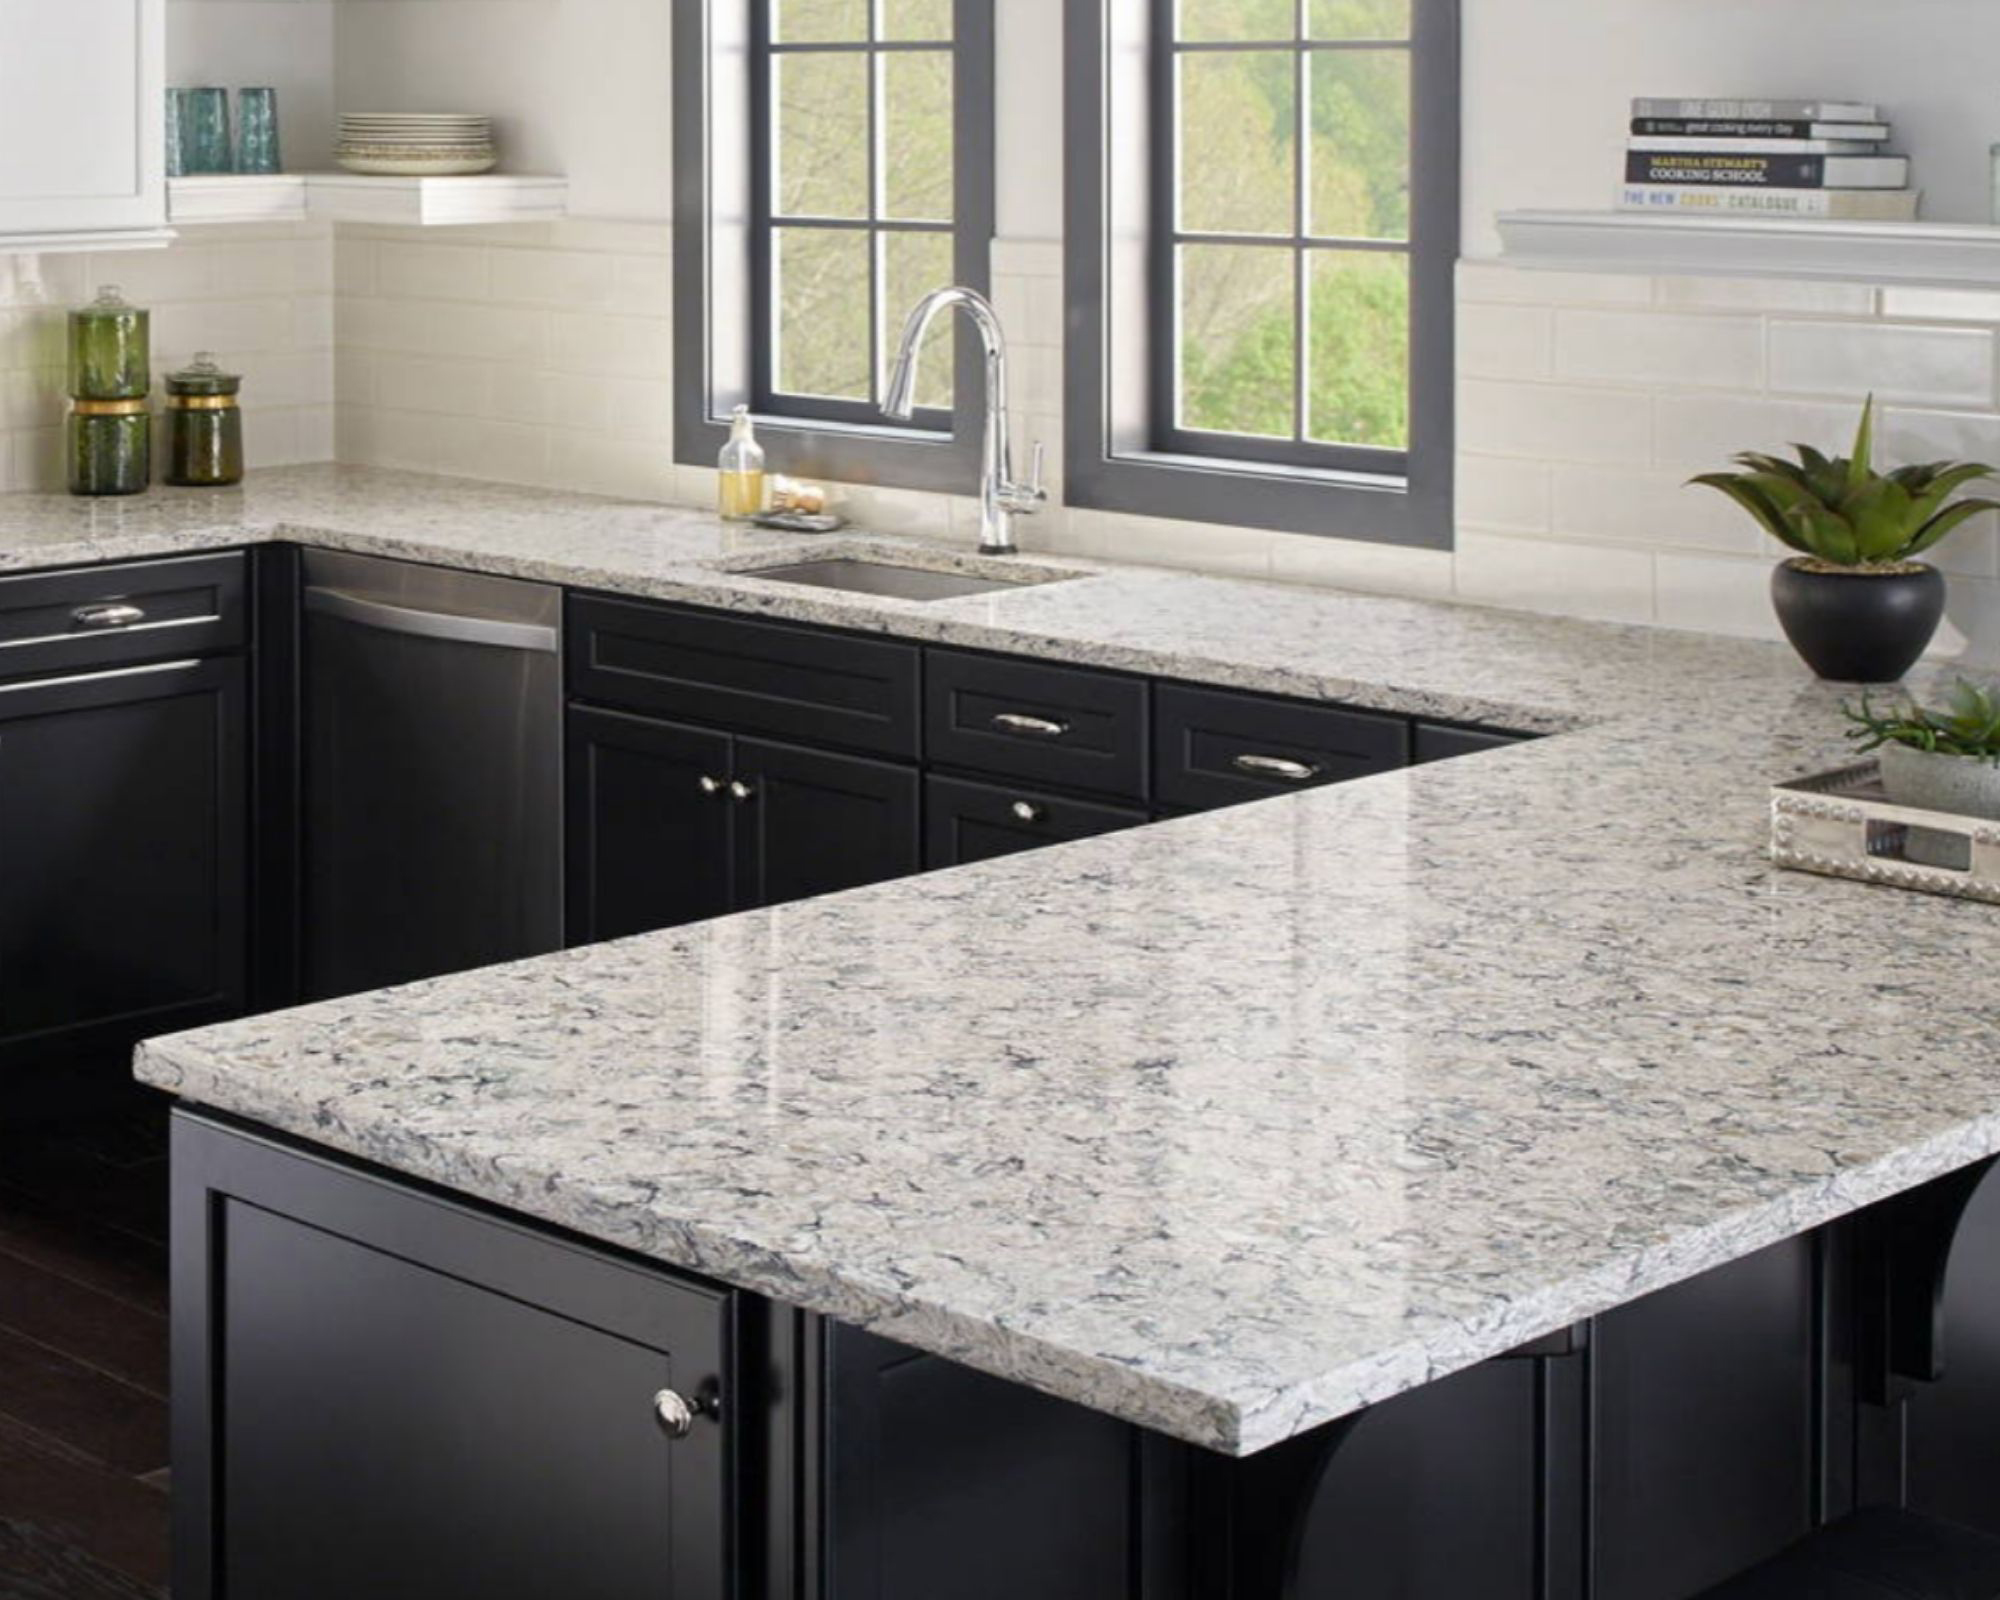 Why Quartz Countertops Might Be Your Most Carefree Countertop